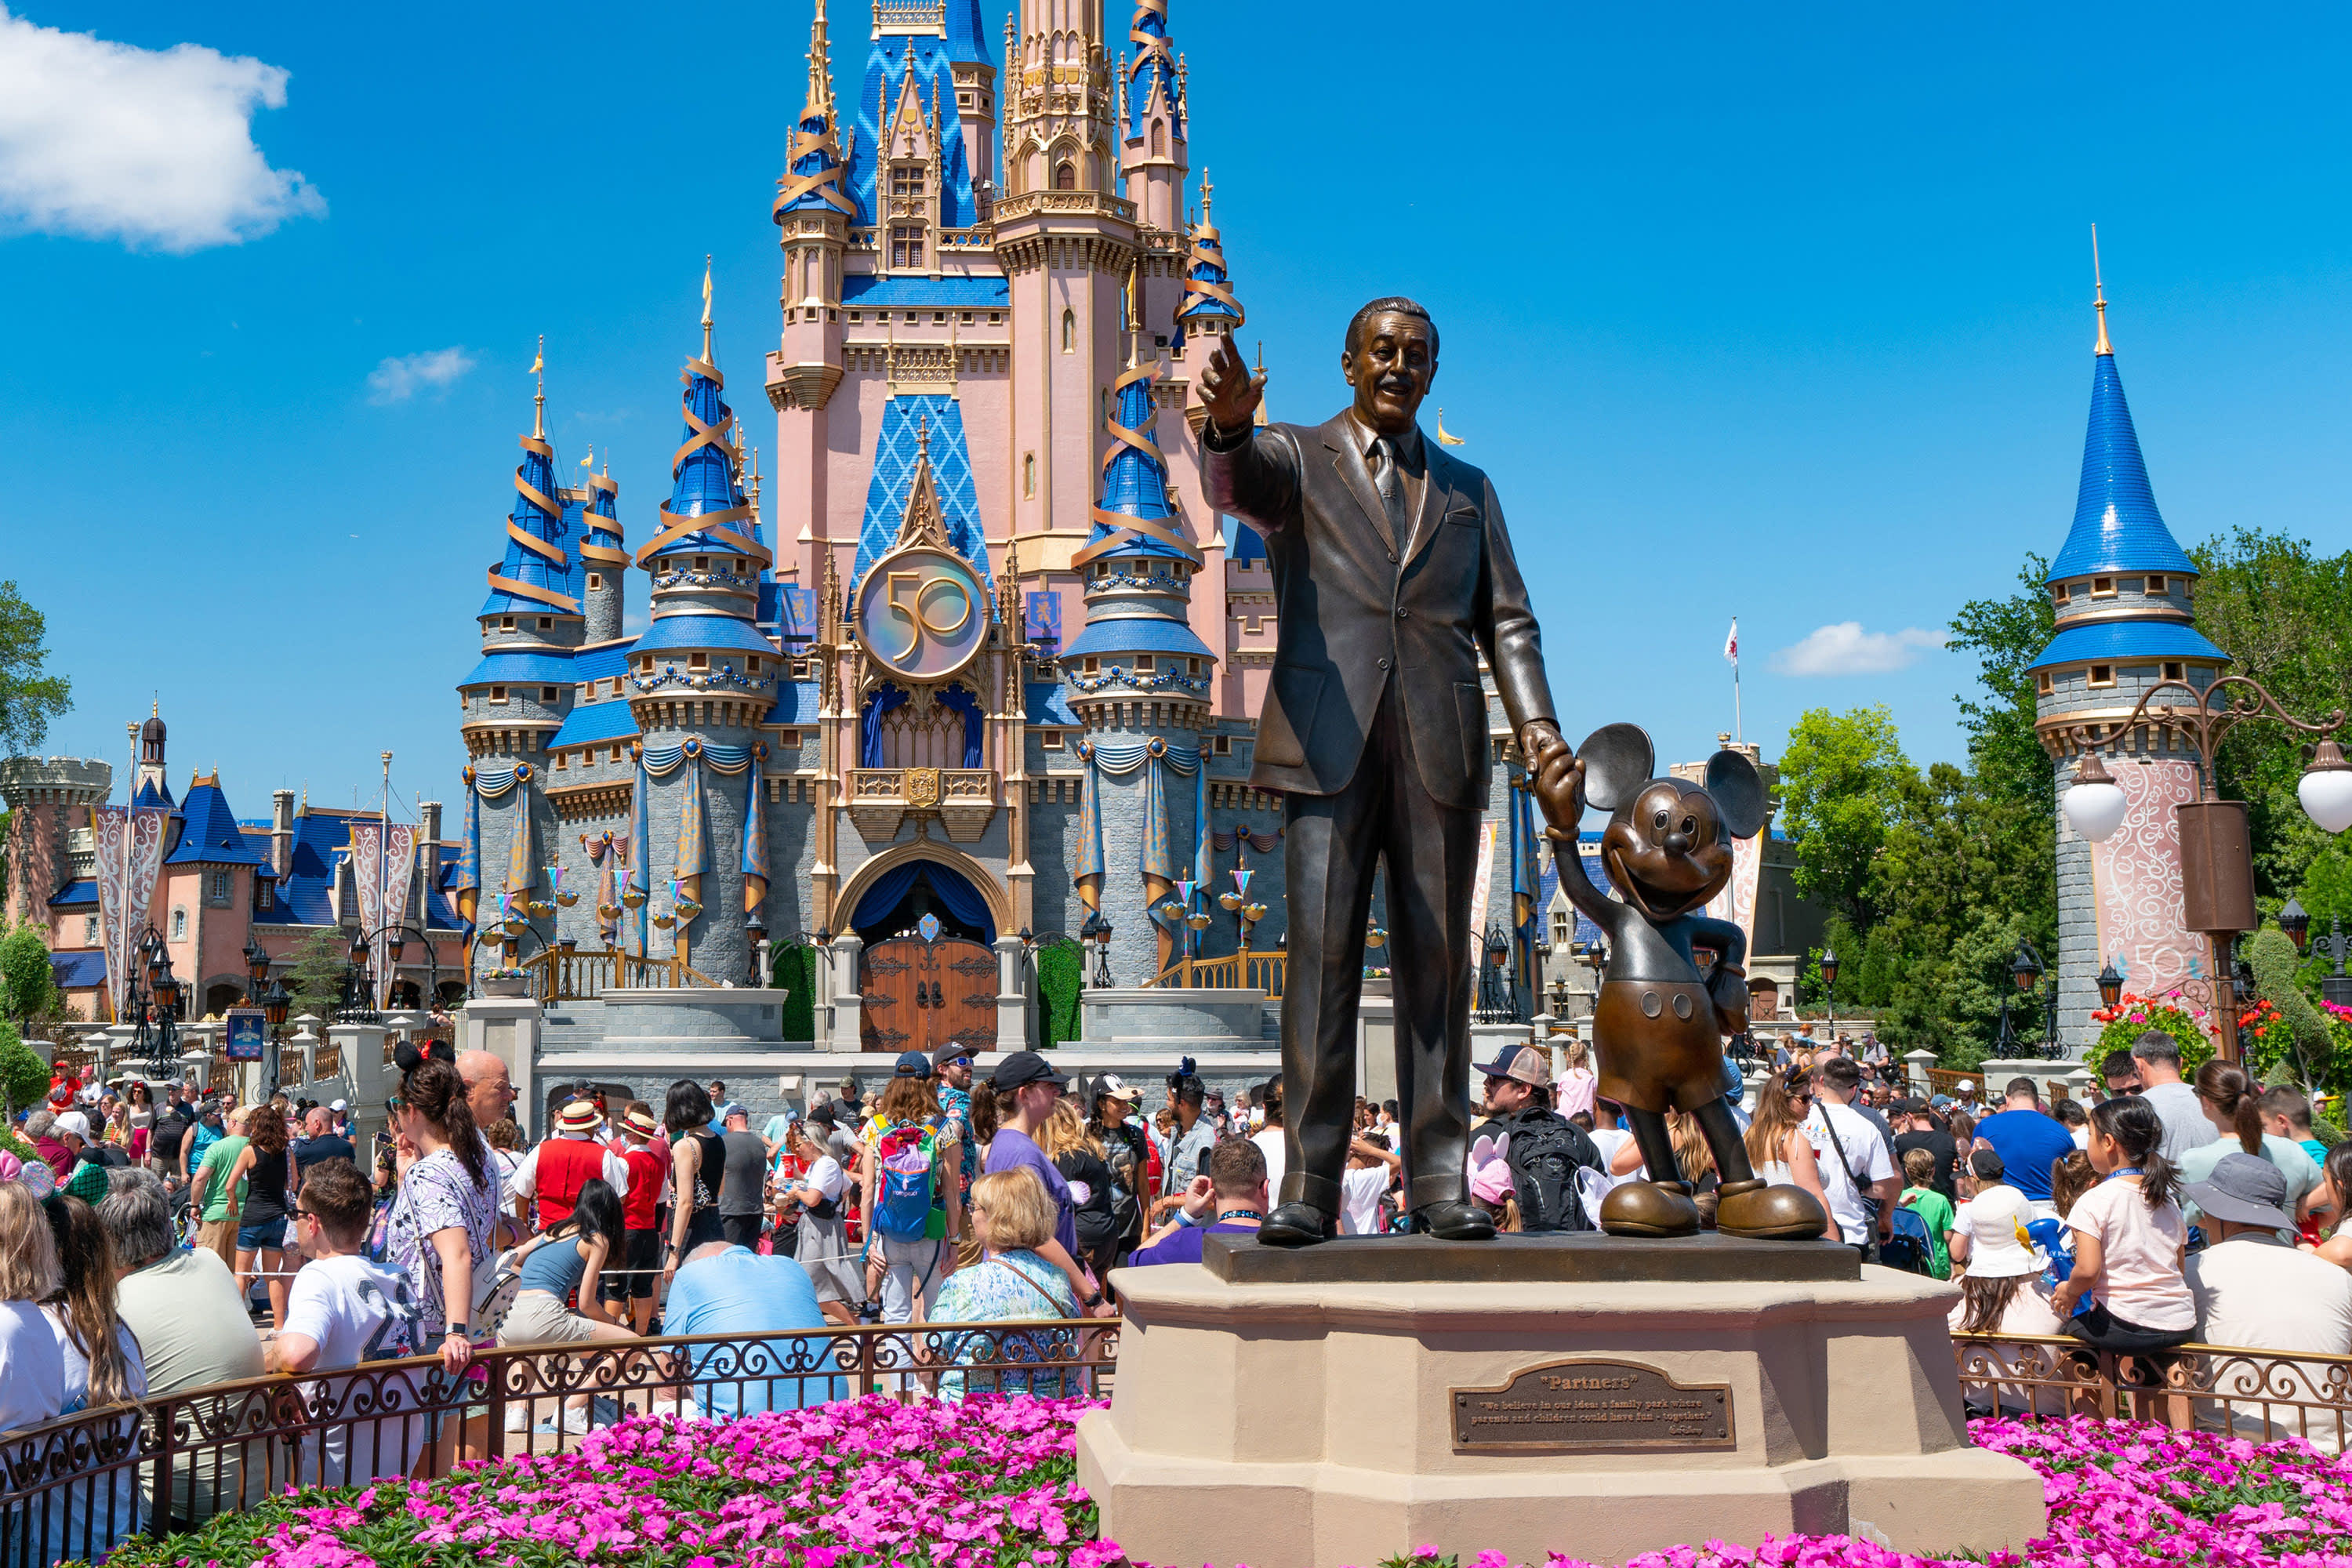 Disney to accelerate and broaden its investments in parks and cruises sector